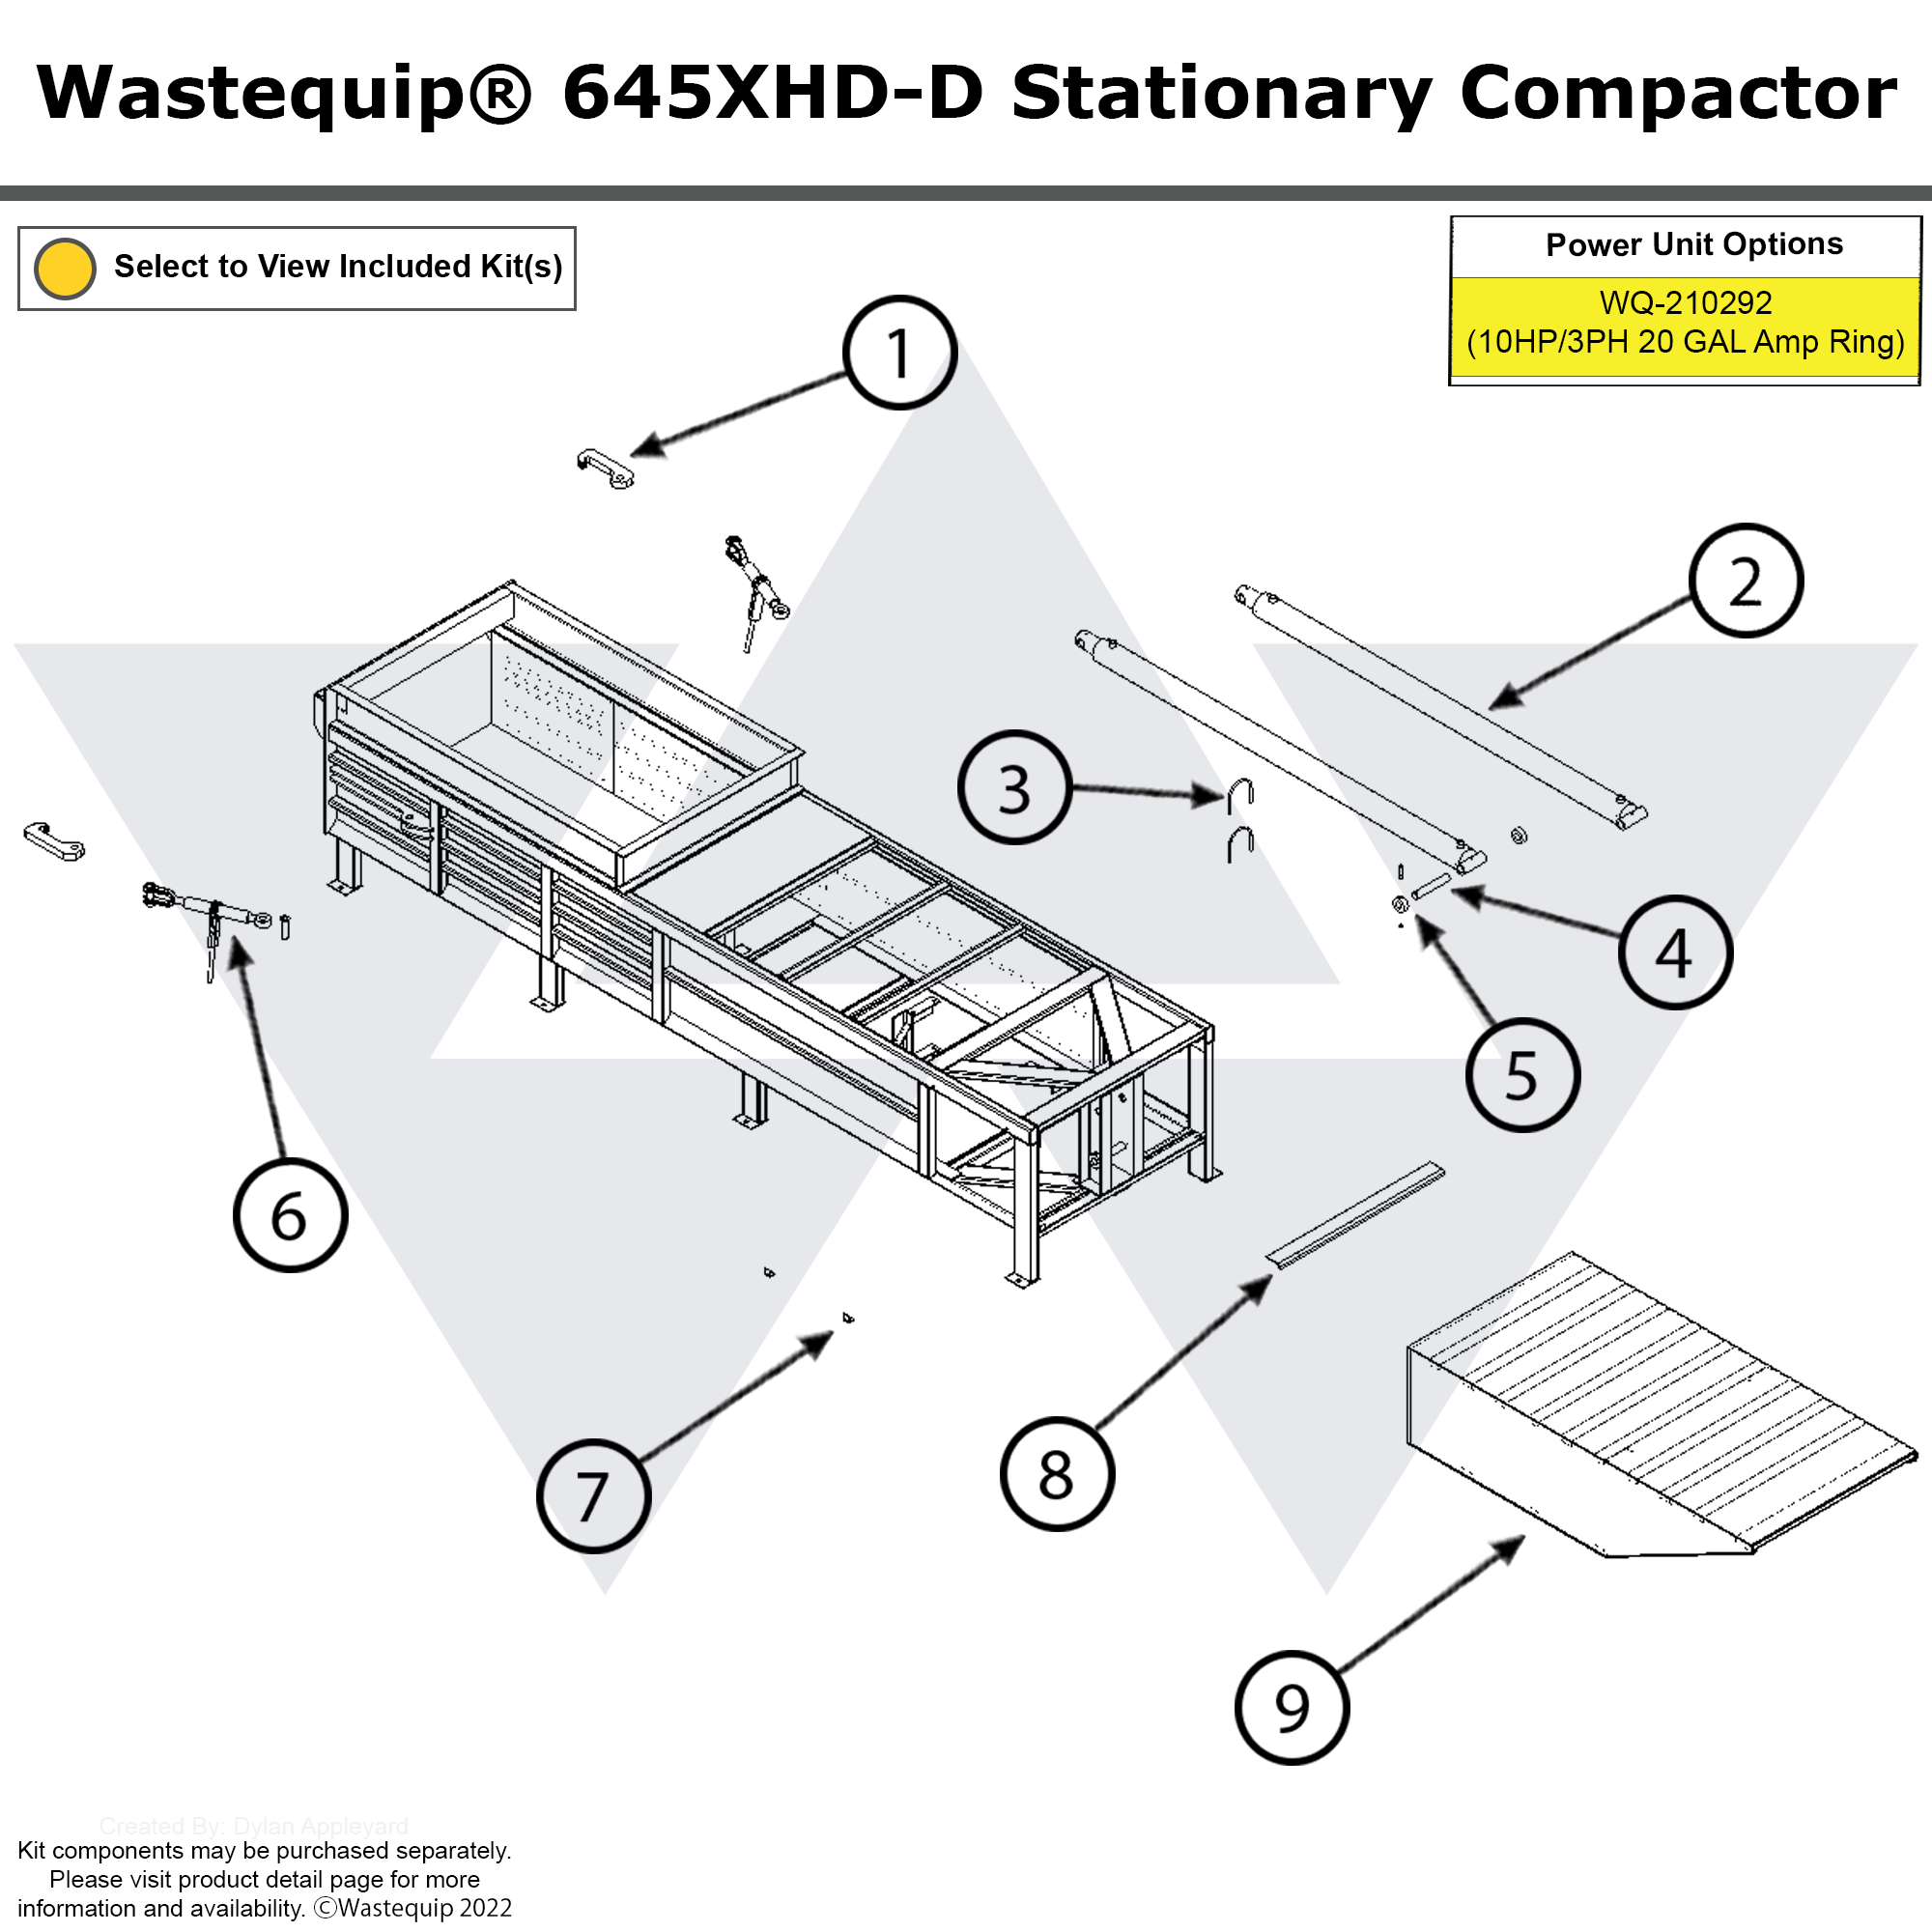 Wastequip® 645XHD-D Stationary Compactor